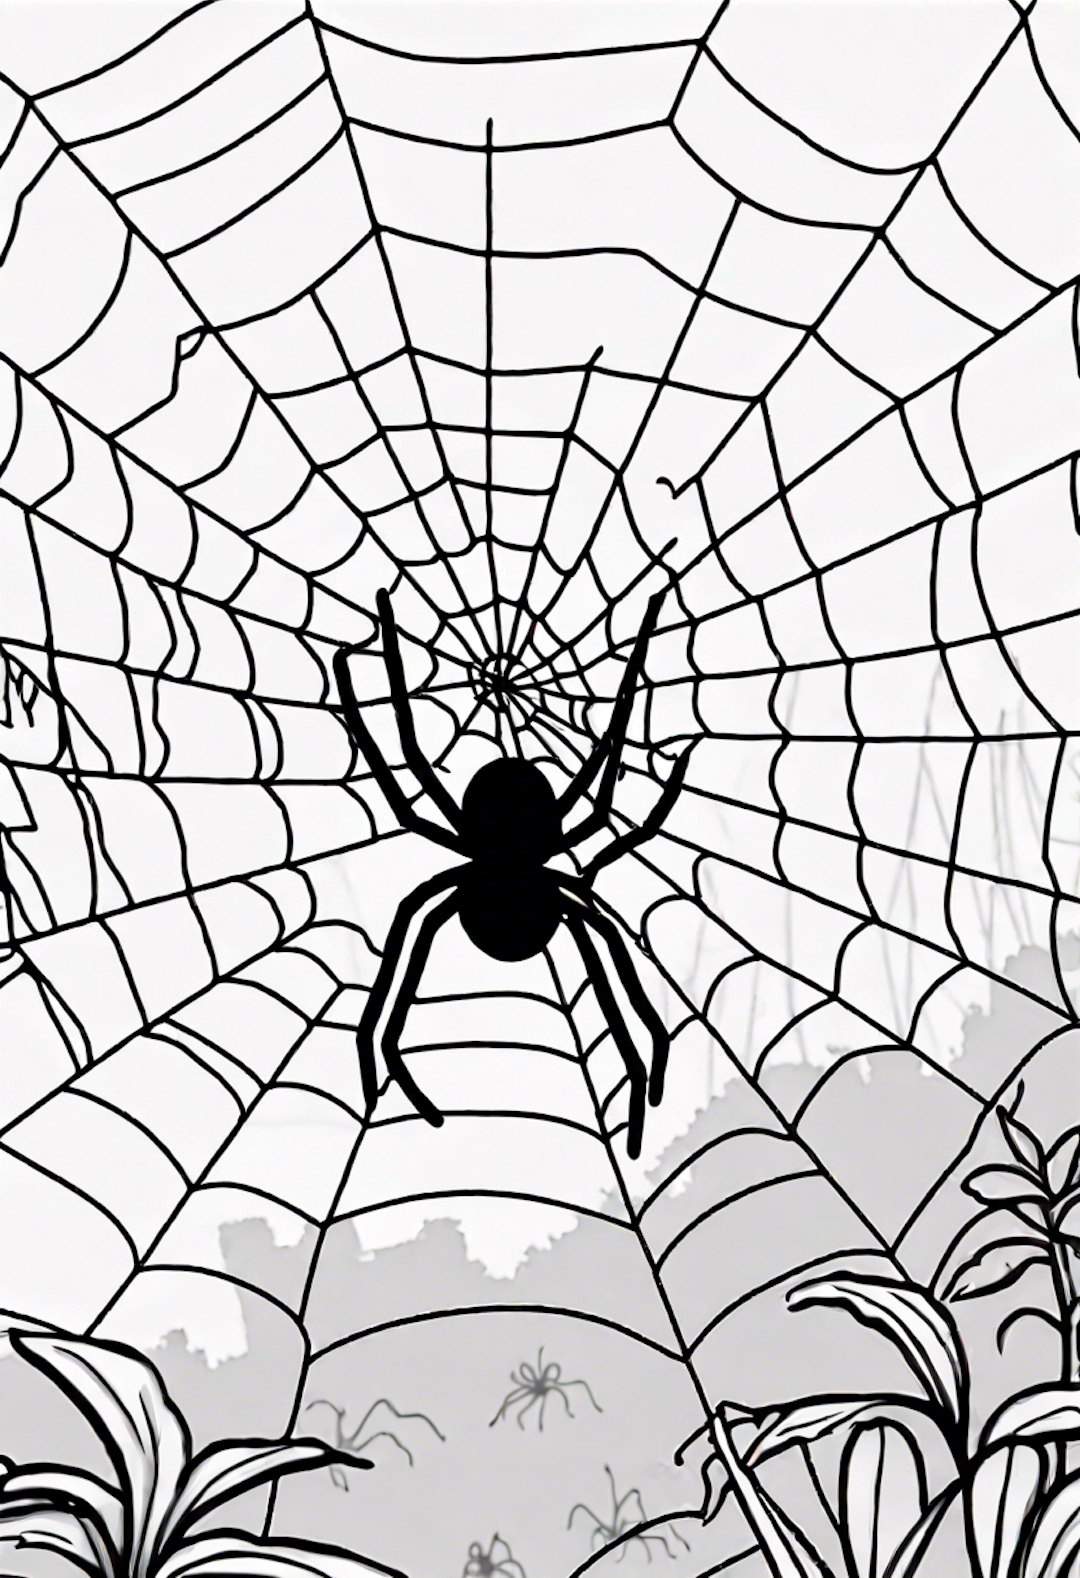 A Spider On A Web At A Zoo